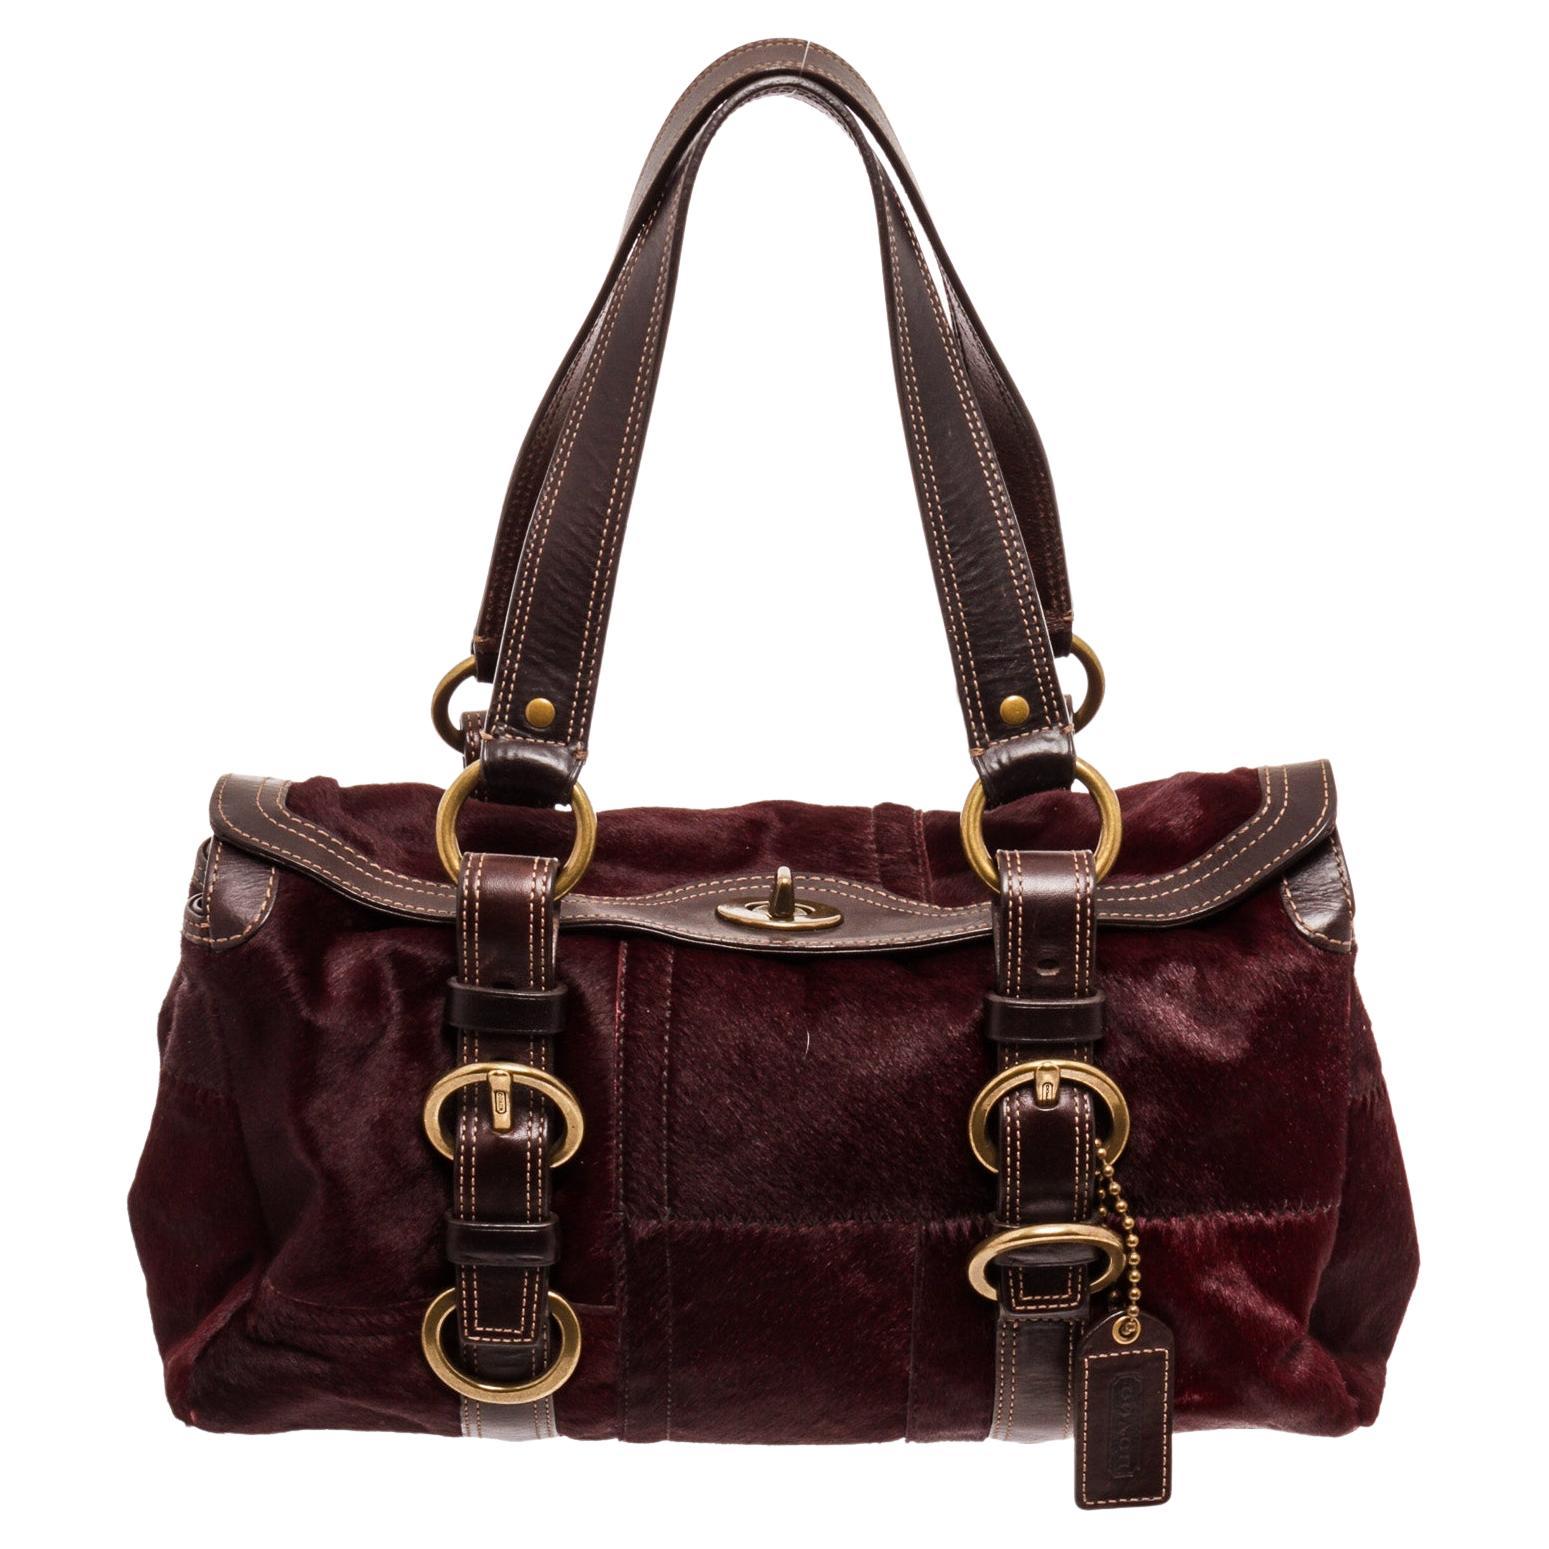 Coach red limited edition pony hair turnlock satchel with gold-tone hardware